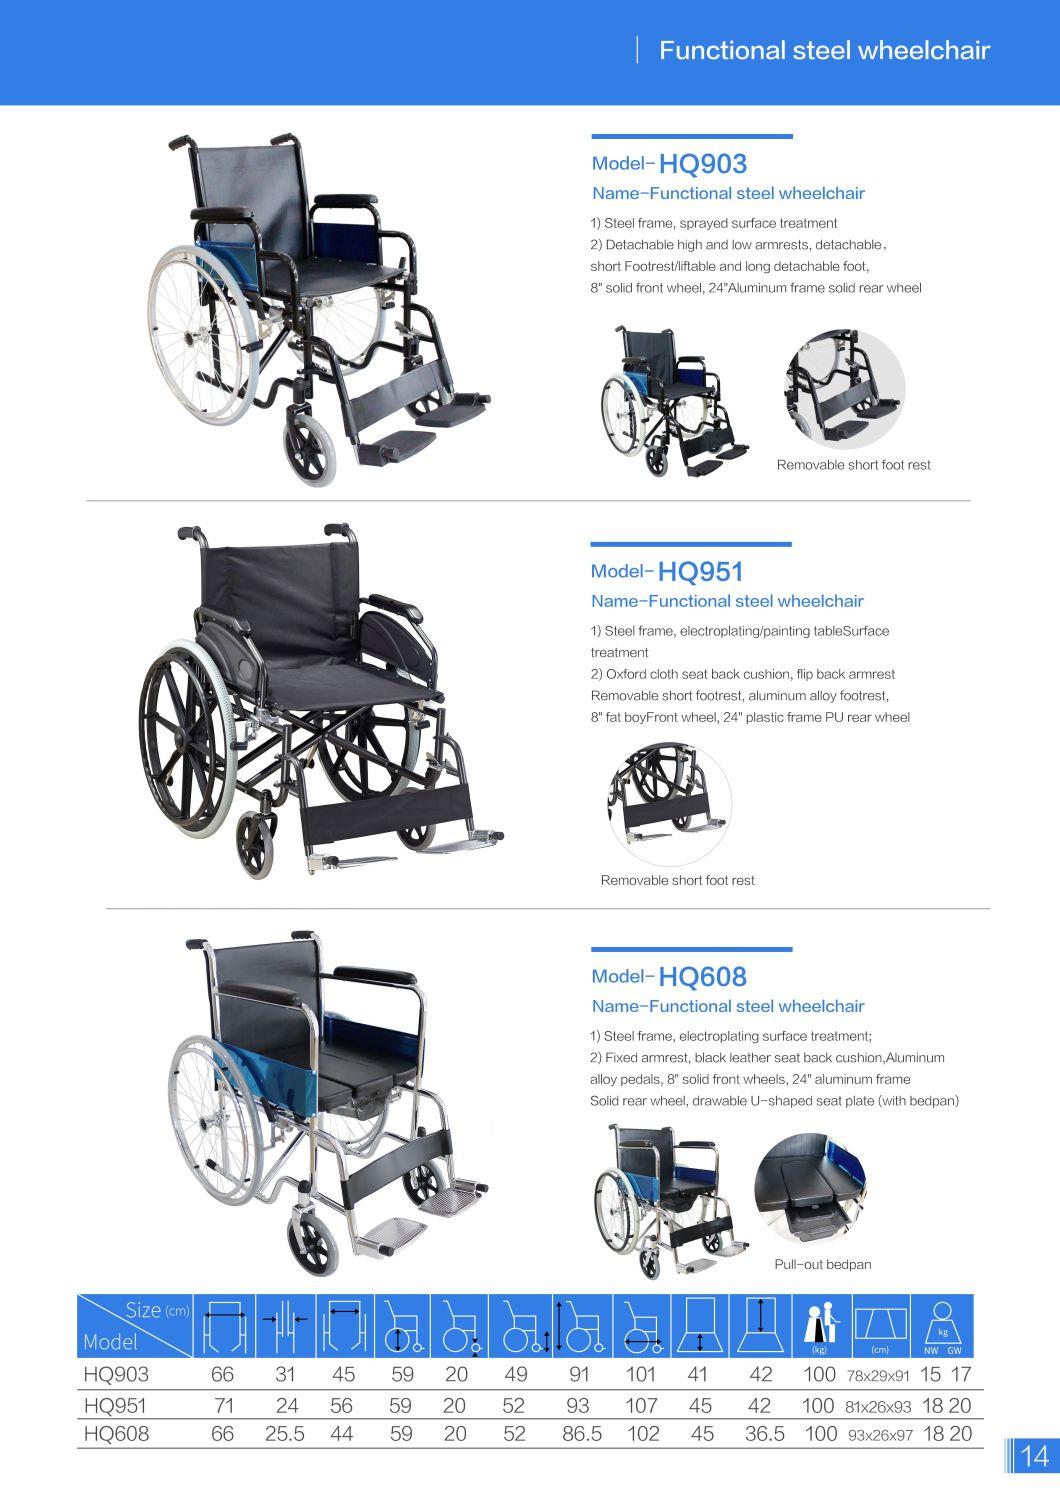 Brand Durable Functional Equipment Heavy Wheelchair at Low Price 1